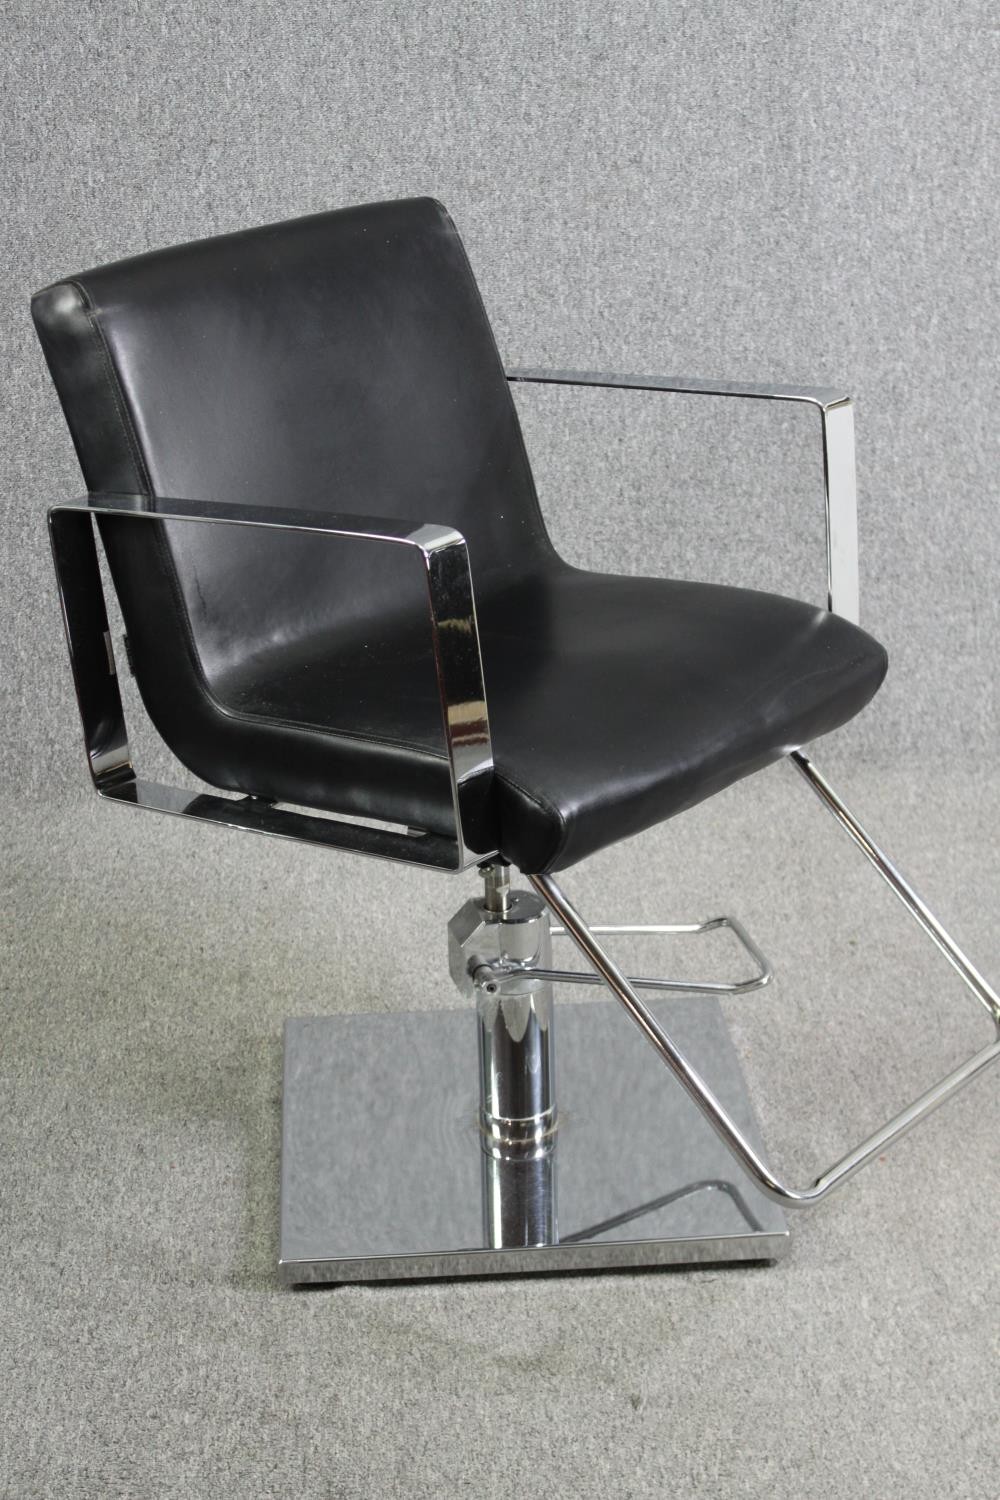 A pair of adjustable chrome barber's chairs in faux leather upholstery. - Image 3 of 6